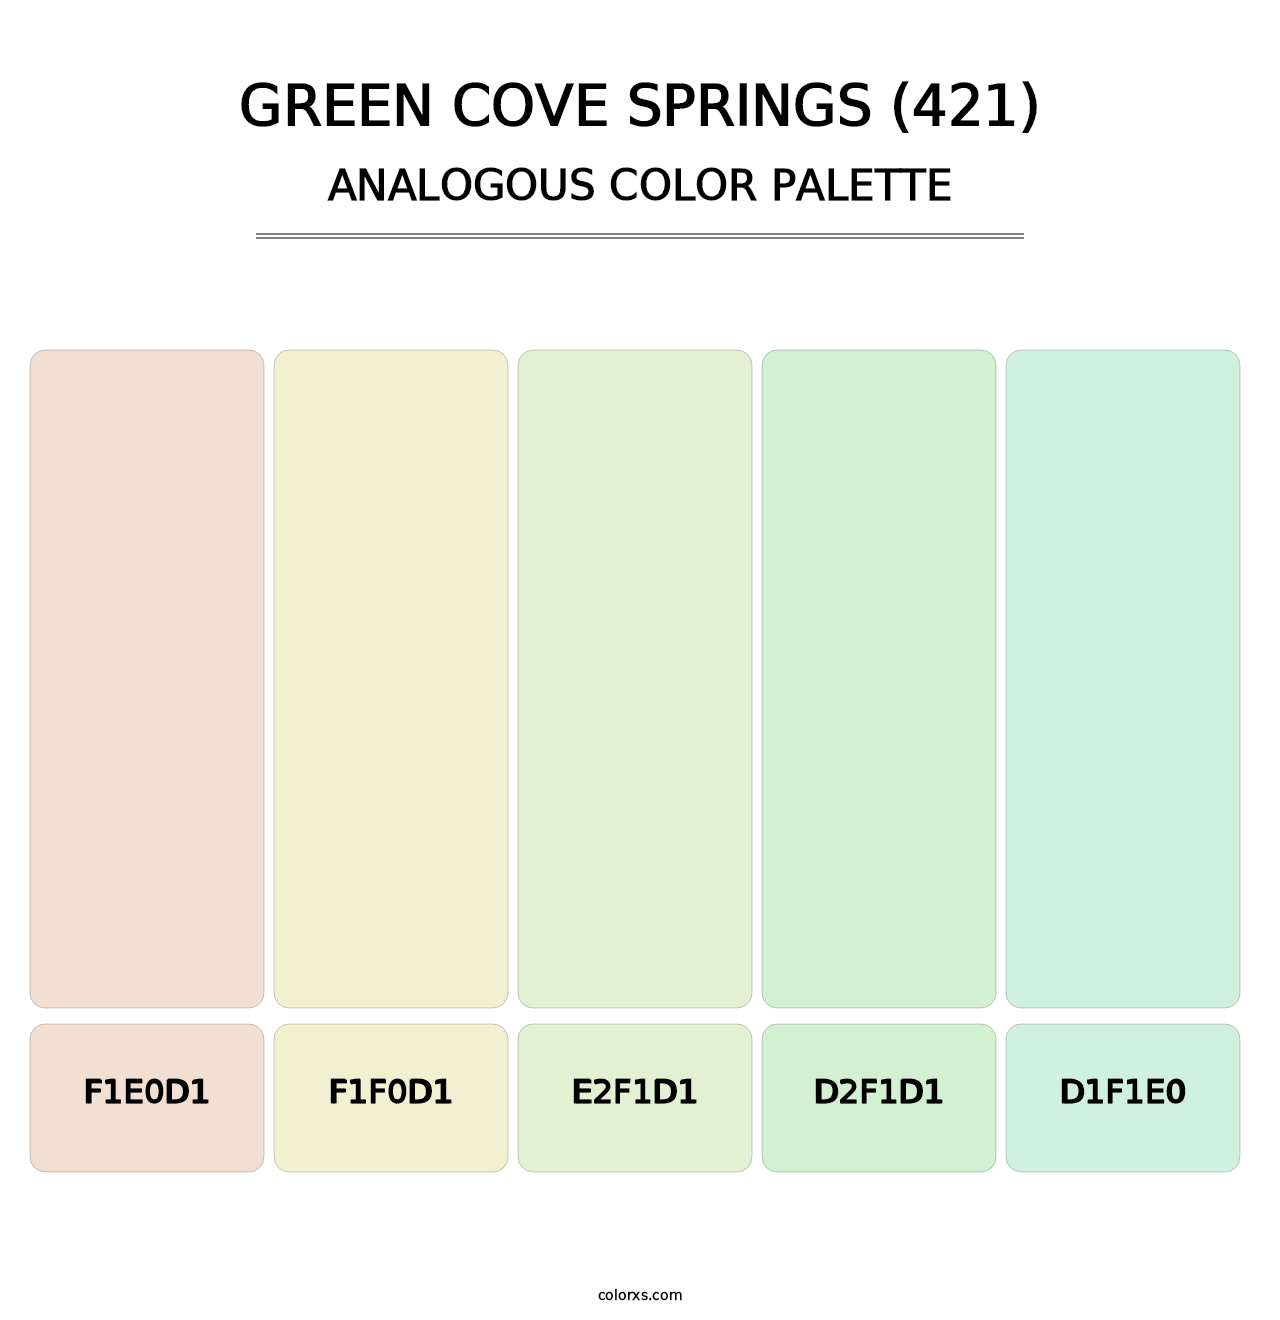 Green Cove Springs (421) - Analogous Color Palette